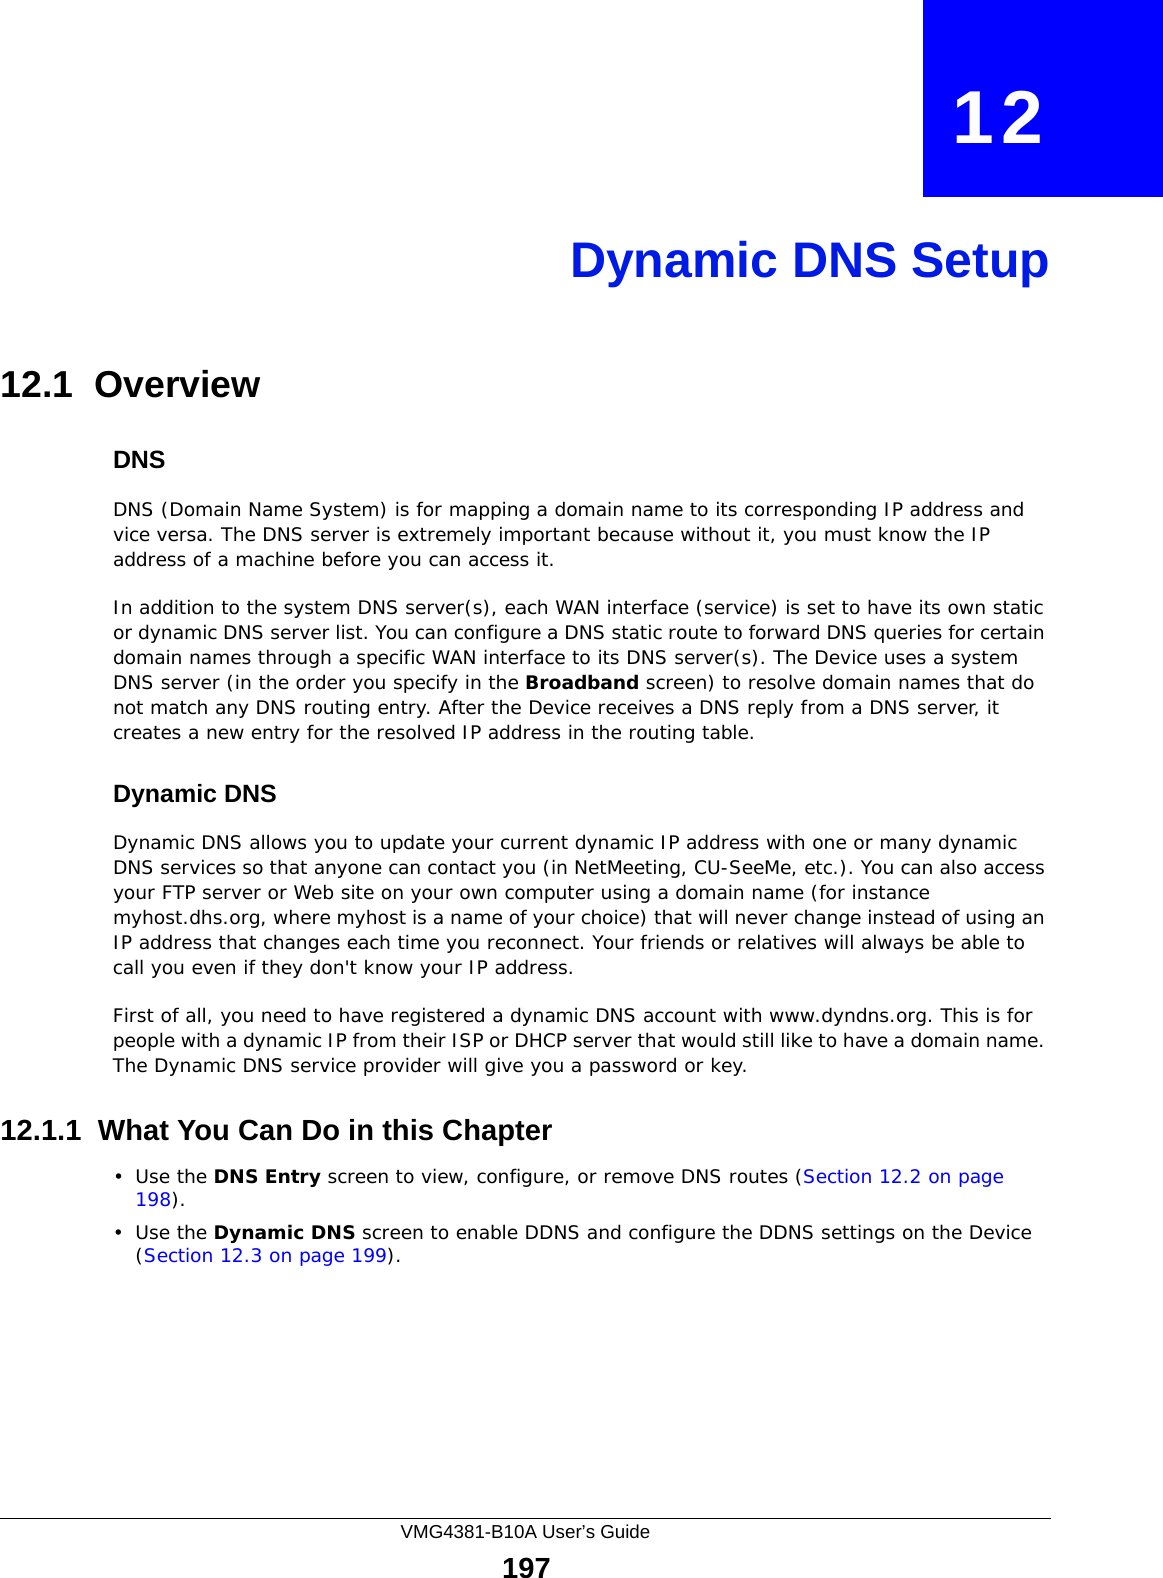 VMG4381-B10A User’s Guide197CHAPTER   12Dynamic DNS Setup12.1  Overview DNSDNS (Domain Name System) is for mapping a domain name to its corresponding IP address and vice versa. The DNS server is extremely important because without it, you must know the IP address of a machine before you can access it. In addition to the system DNS server(s), each WAN interface (service) is set to have its own static or dynamic DNS server list. You can configure a DNS static route to forward DNS queries for certain domain names through a specific WAN interface to its DNS server(s). The Device uses a system DNS server (in the order you specify in the Broadband screen) to resolve domain names that do not match any DNS routing entry. After the Device receives a DNS reply from a DNS server, it creates a new entry for the resolved IP address in the routing table.Dynamic DNSDynamic DNS allows you to update your current dynamic IP address with one or many dynamic DNS services so that anyone can contact you (in NetMeeting, CU-SeeMe, etc.). You can also access your FTP server or Web site on your own computer using a domain name (for instance myhost.dhs.org, where myhost is a name of your choice) that will never change instead of using an IP address that changes each time you reconnect. Your friends or relatives will always be able to call you even if they don&apos;t know your IP address.First of all, you need to have registered a dynamic DNS account with www.dyndns.org. This is for people with a dynamic IP from their ISP or DHCP server that would still like to have a domain name. The Dynamic DNS service provider will give you a password or key. 12.1.1  What You Can Do in this Chapter•Use the DNS Entry screen to view, configure, or remove DNS routes (Section 12.2 on page 198).•Use the Dynamic DNS screen to enable DDNS and configure the DDNS settings on the Device (Section 12.3 on page 199).